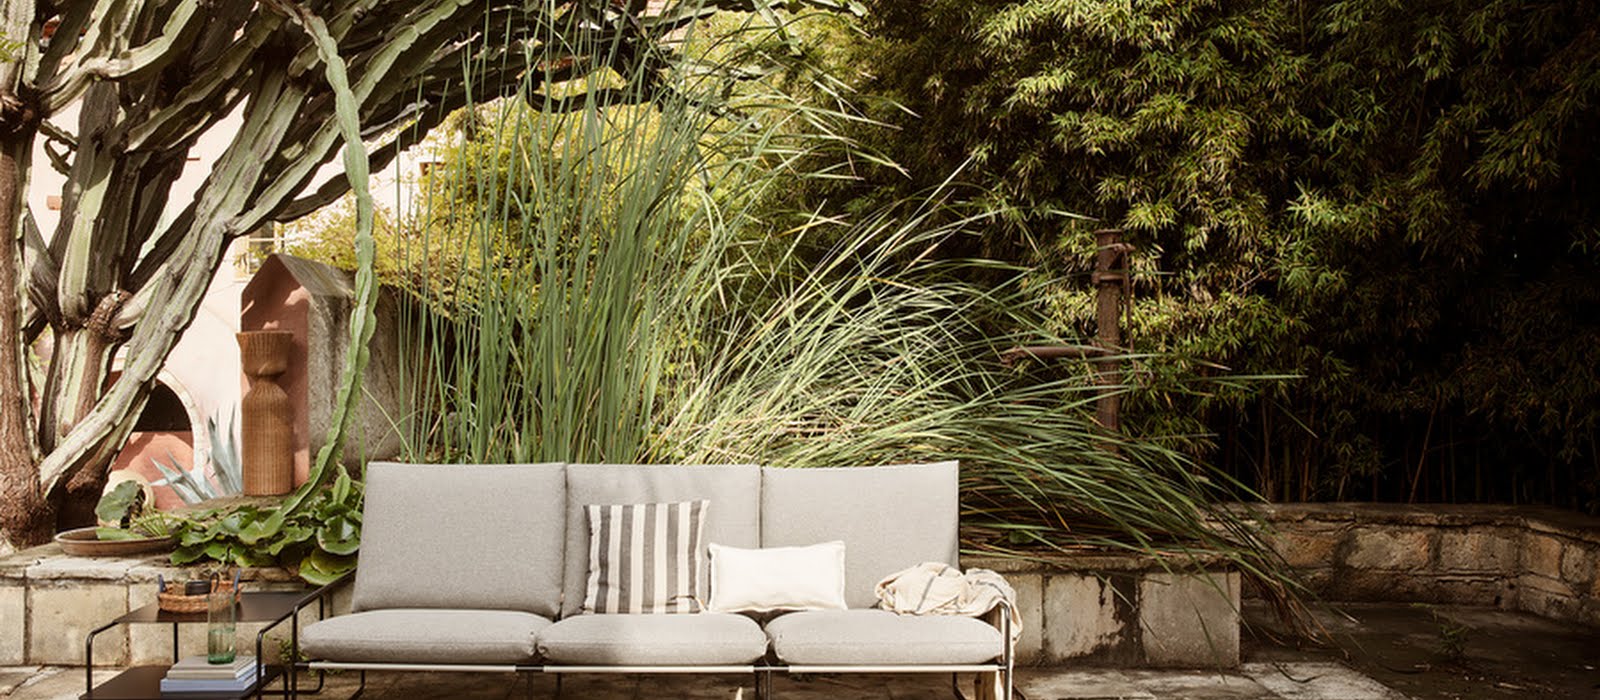 Garden accessories to blend your indoor and outdoor spaces this summer